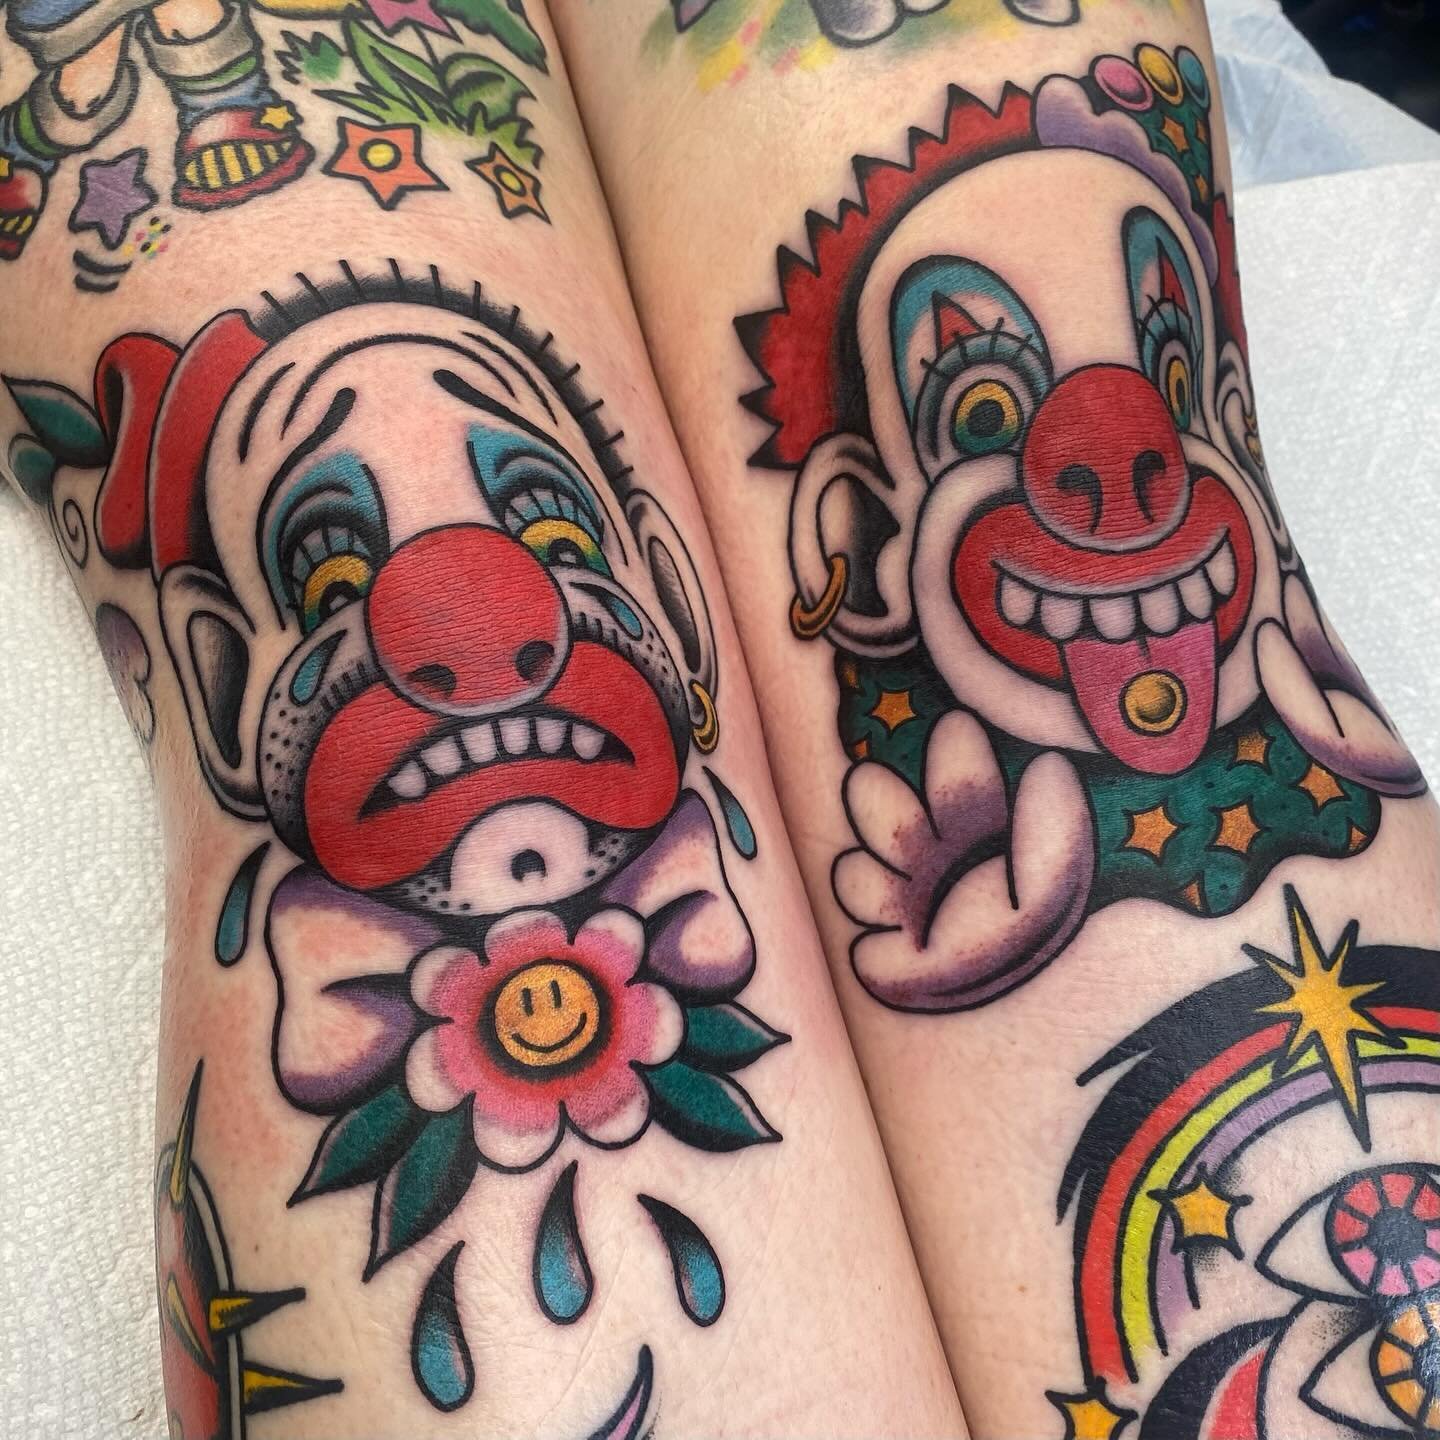 🤡 

❤️ books open / walk ins thurs-mon
📍@downtowntattoolasvegas
🔗 check &lsquo;booking&rsquo; highlight to book in
‼️check spam for reply

UPCOMING GUEST SPOTS + EVENTS :

✨ ASHEVILLE, NC
April 13-16th
@sevenswordstattoo_asheville
*fully booked - 